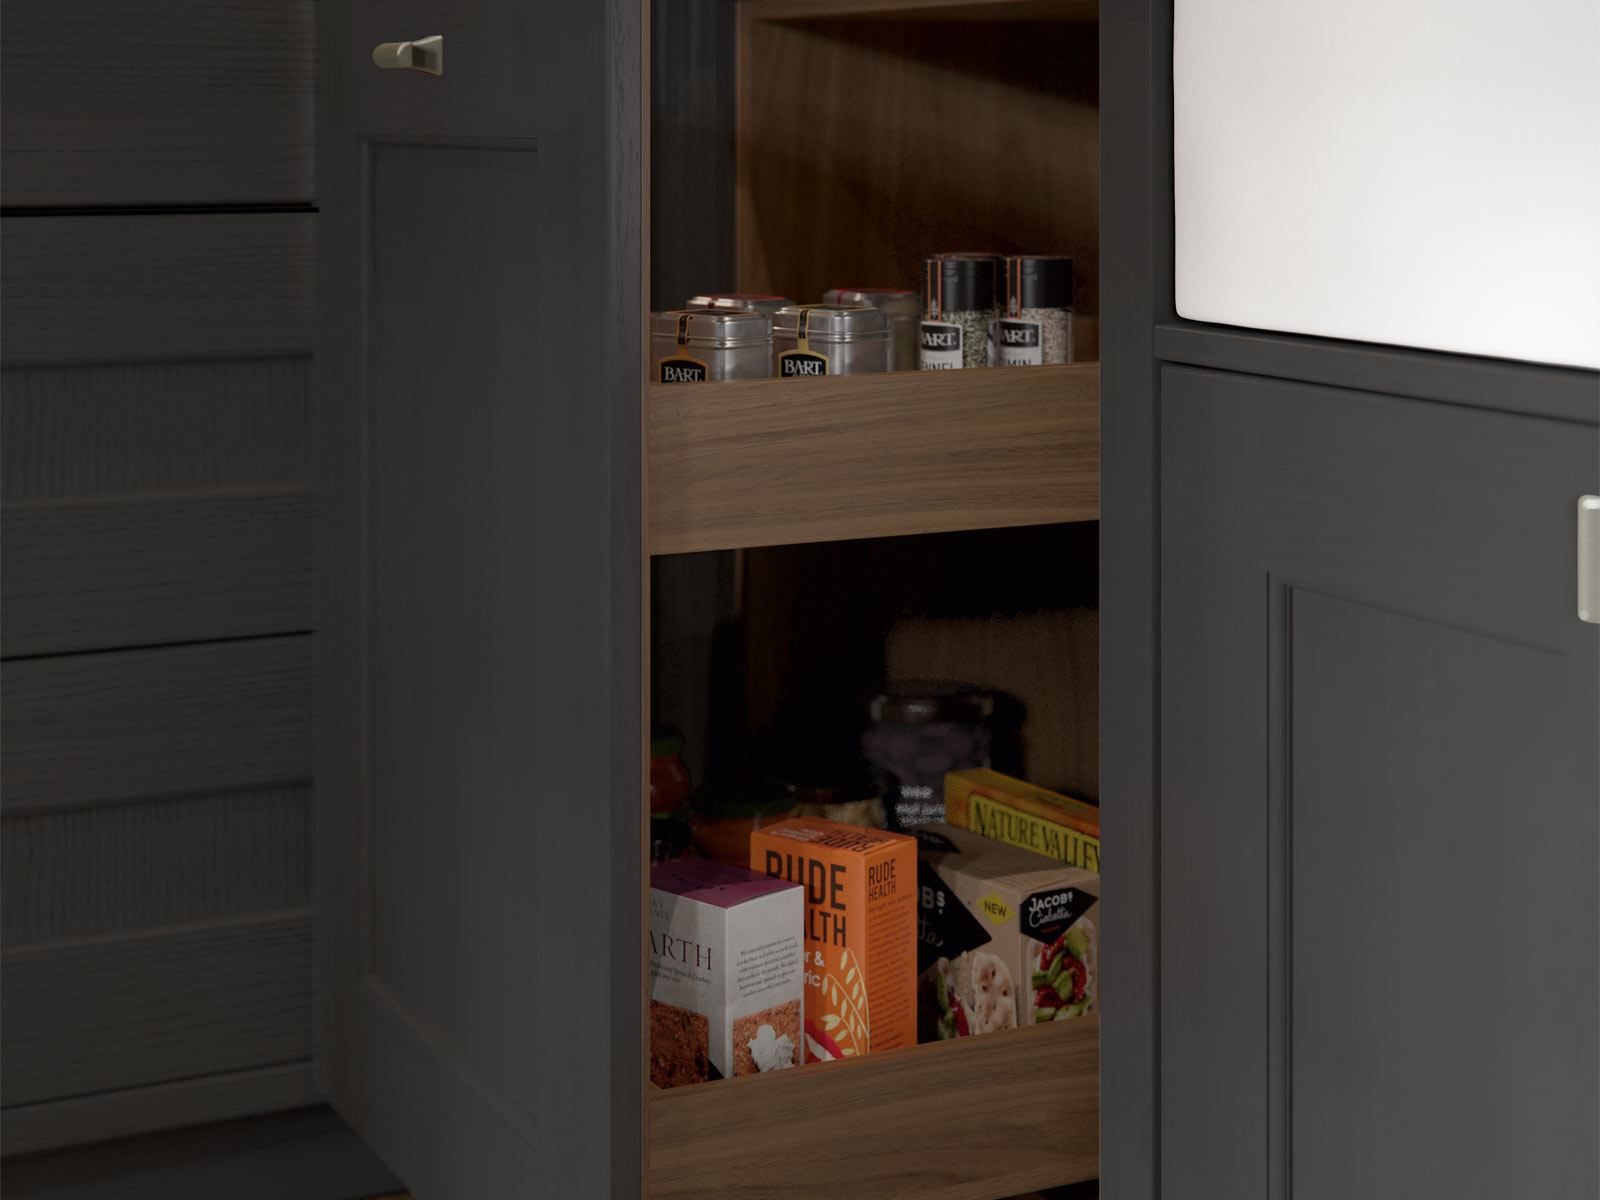 A pull-out cabinet kitchen furniture item containing spices and food packs